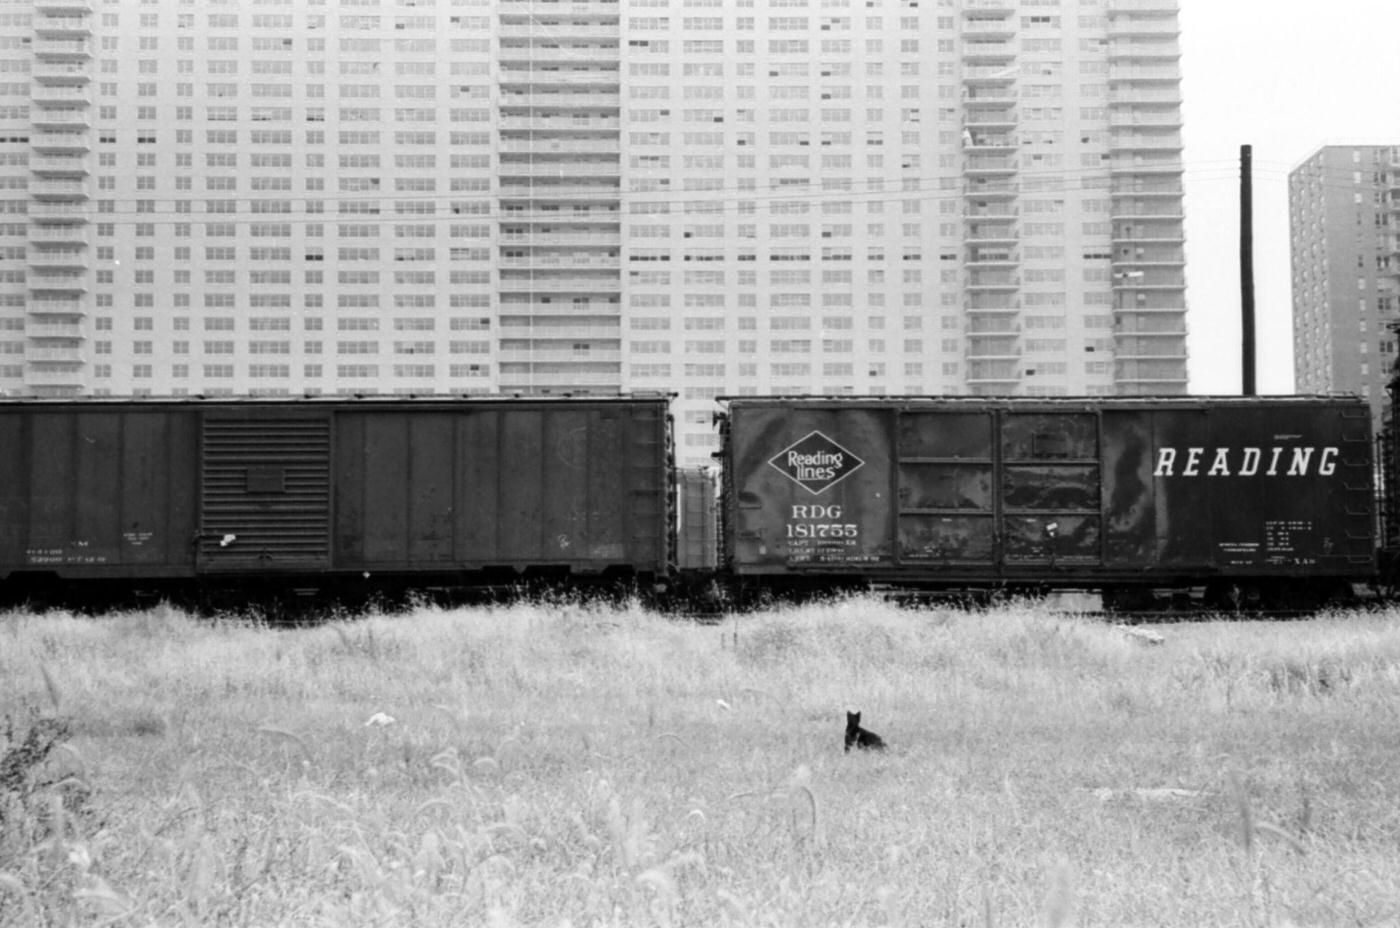 A View Of Reading Railroad Box Cars In Upper Manhattan'S, 1965.